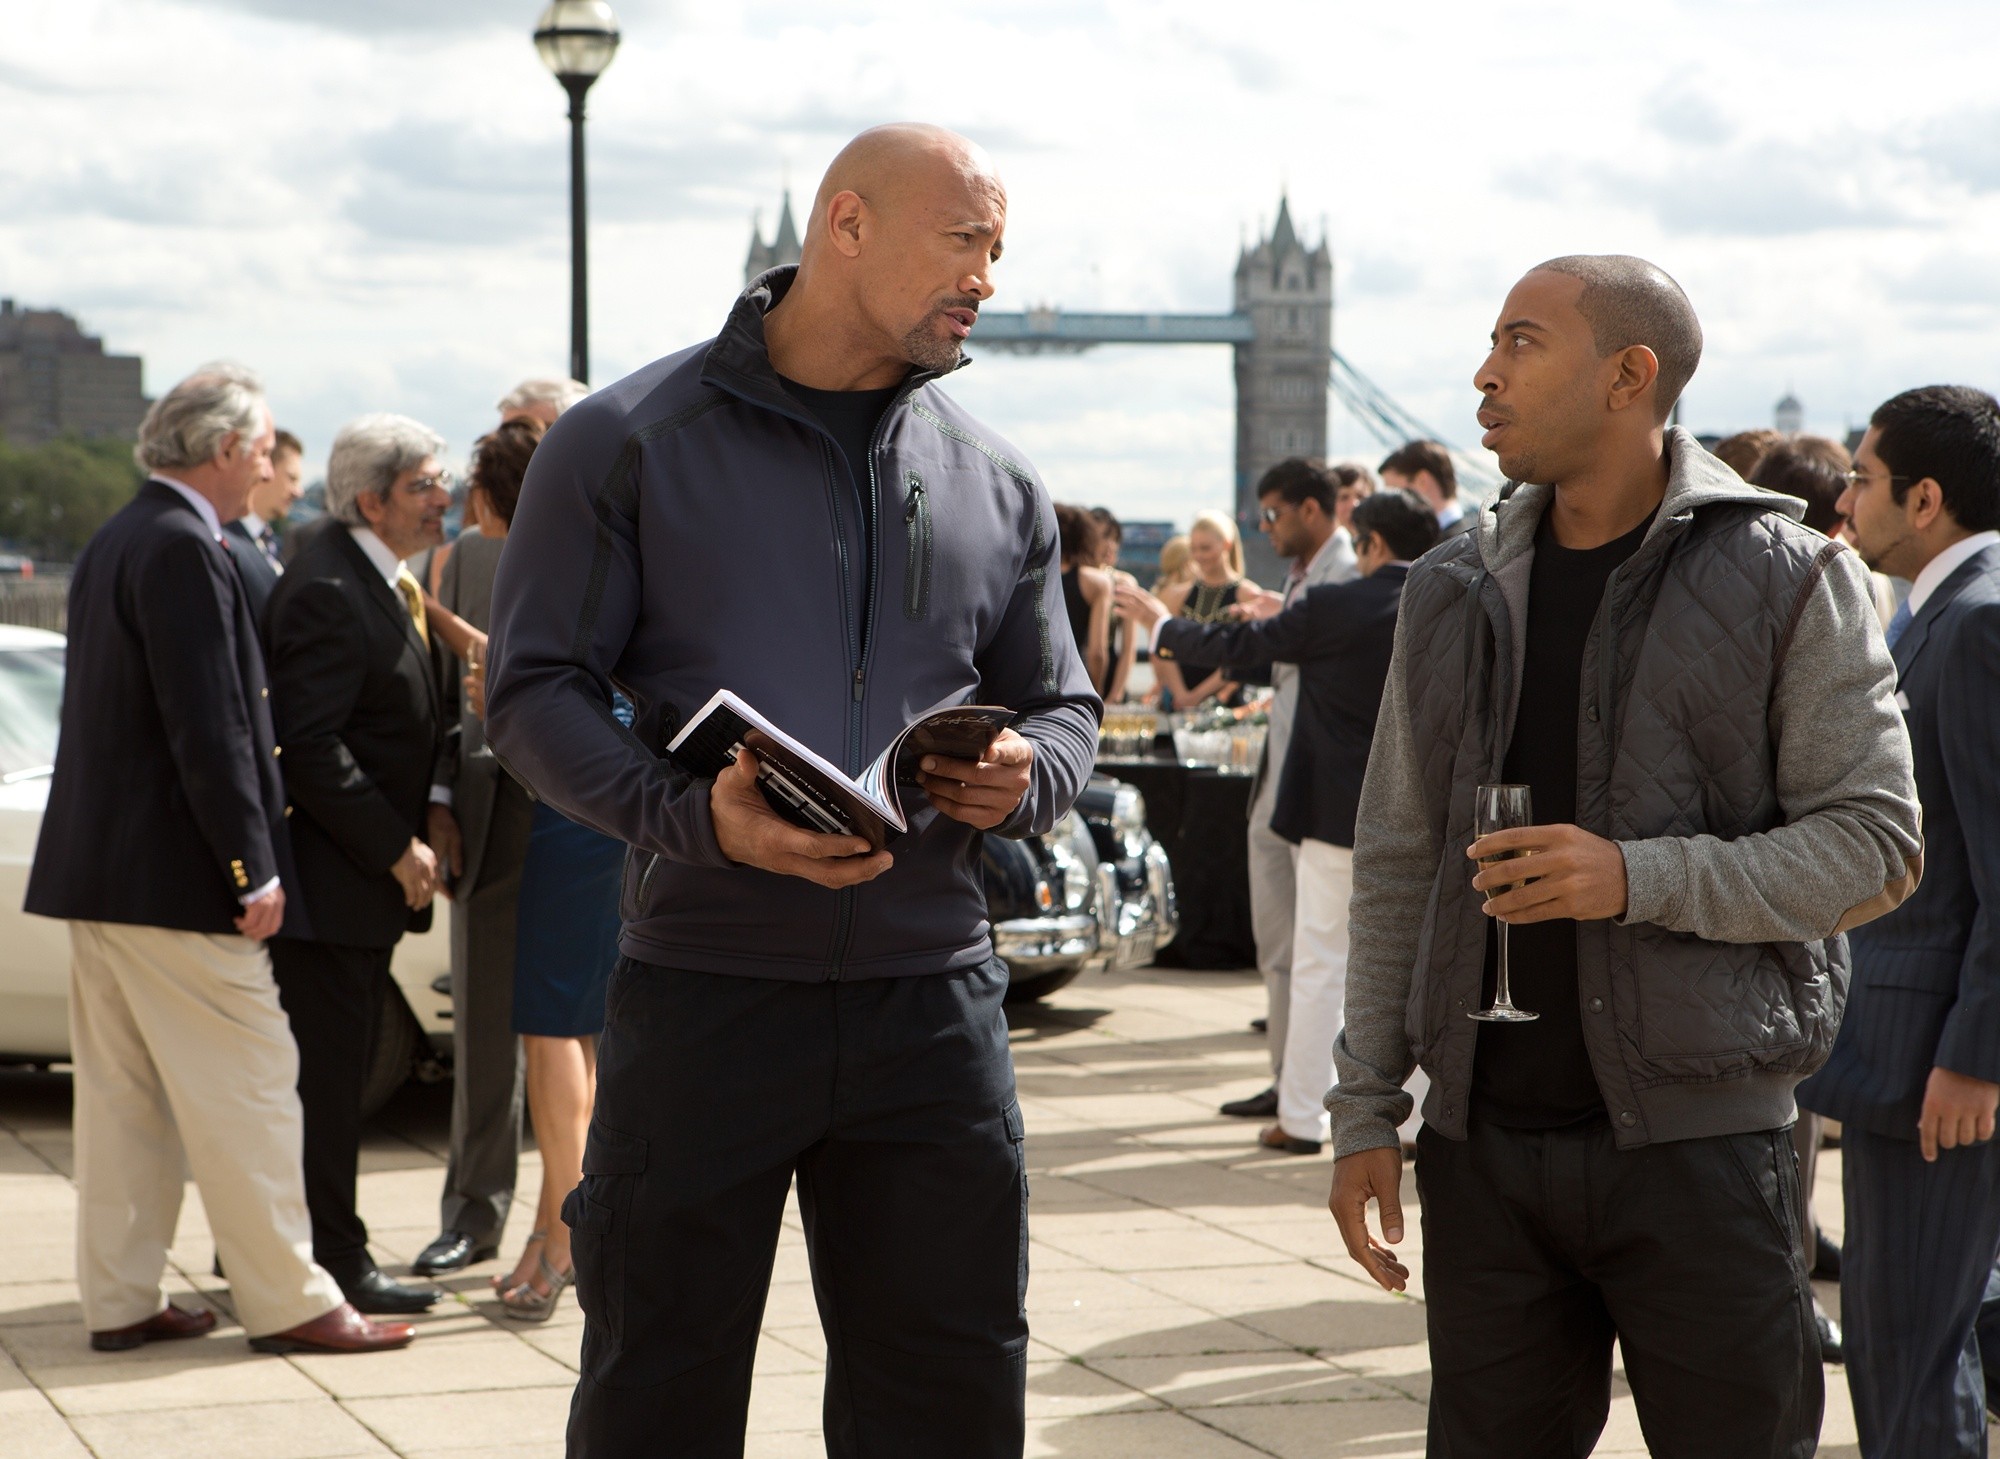 The Rock stars as Luke Hobbs and Ludacris stars as Tej Parker in Universal Pictures' Fast and Furious 6 (2013)